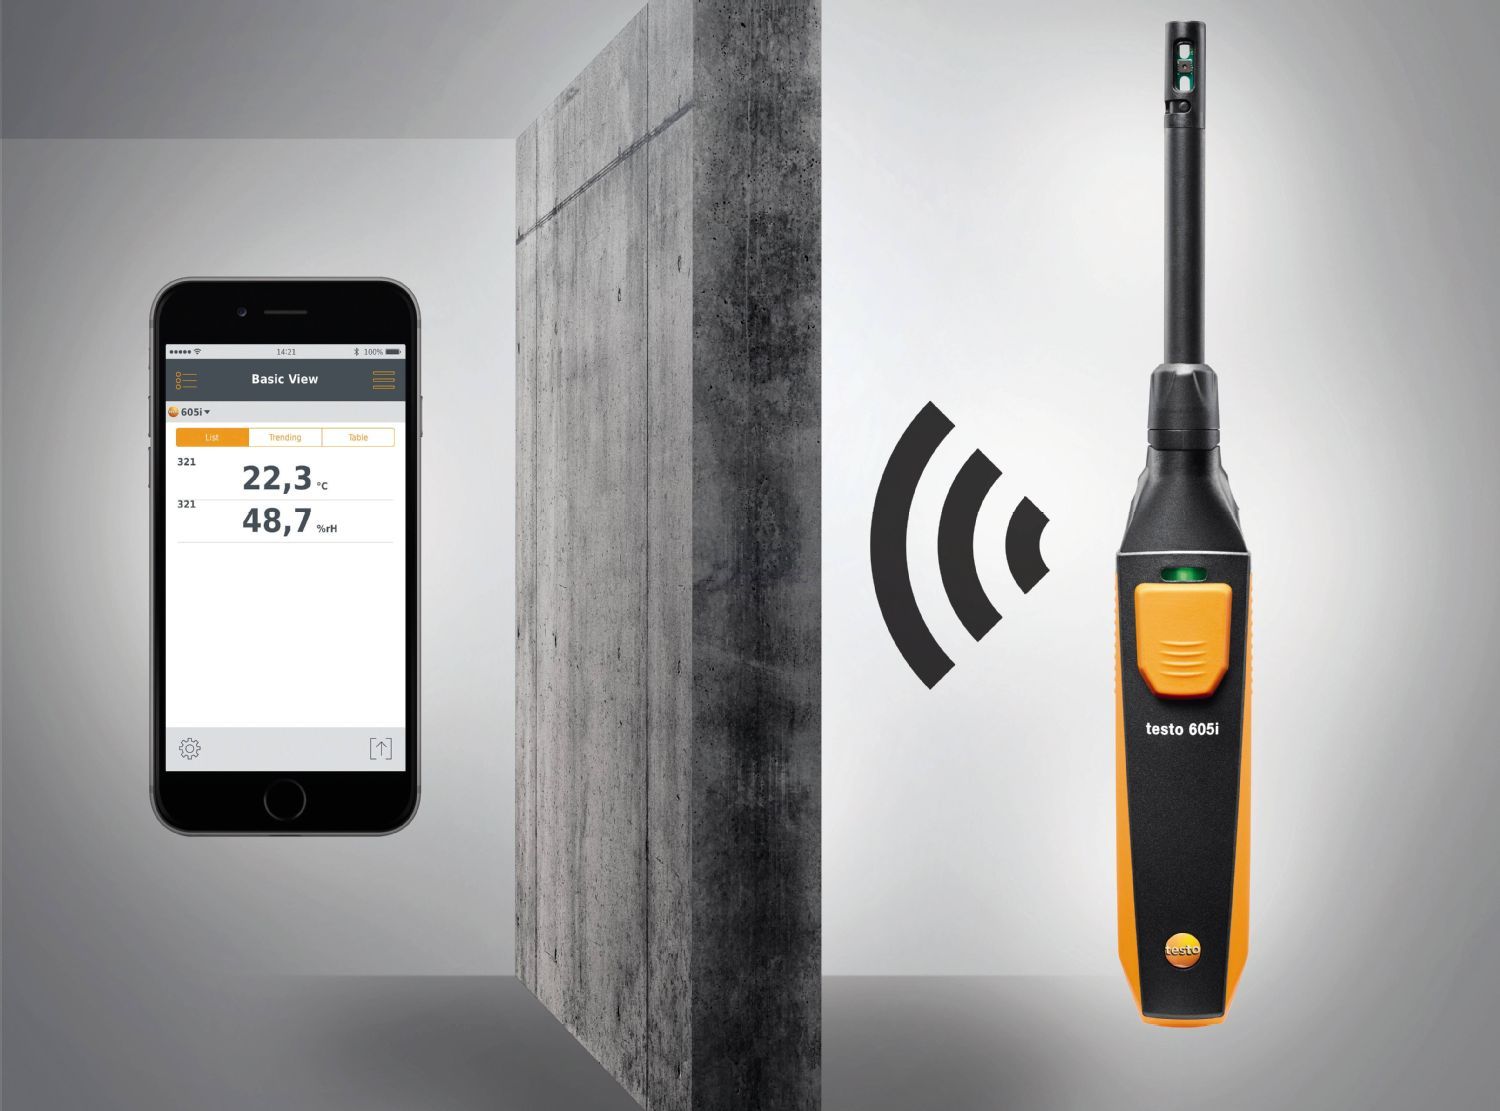 Testo 605i Gen 2 - Smart Thermohygrometer Operated With Your Smartphone 0560 2605 02 connection smart phone